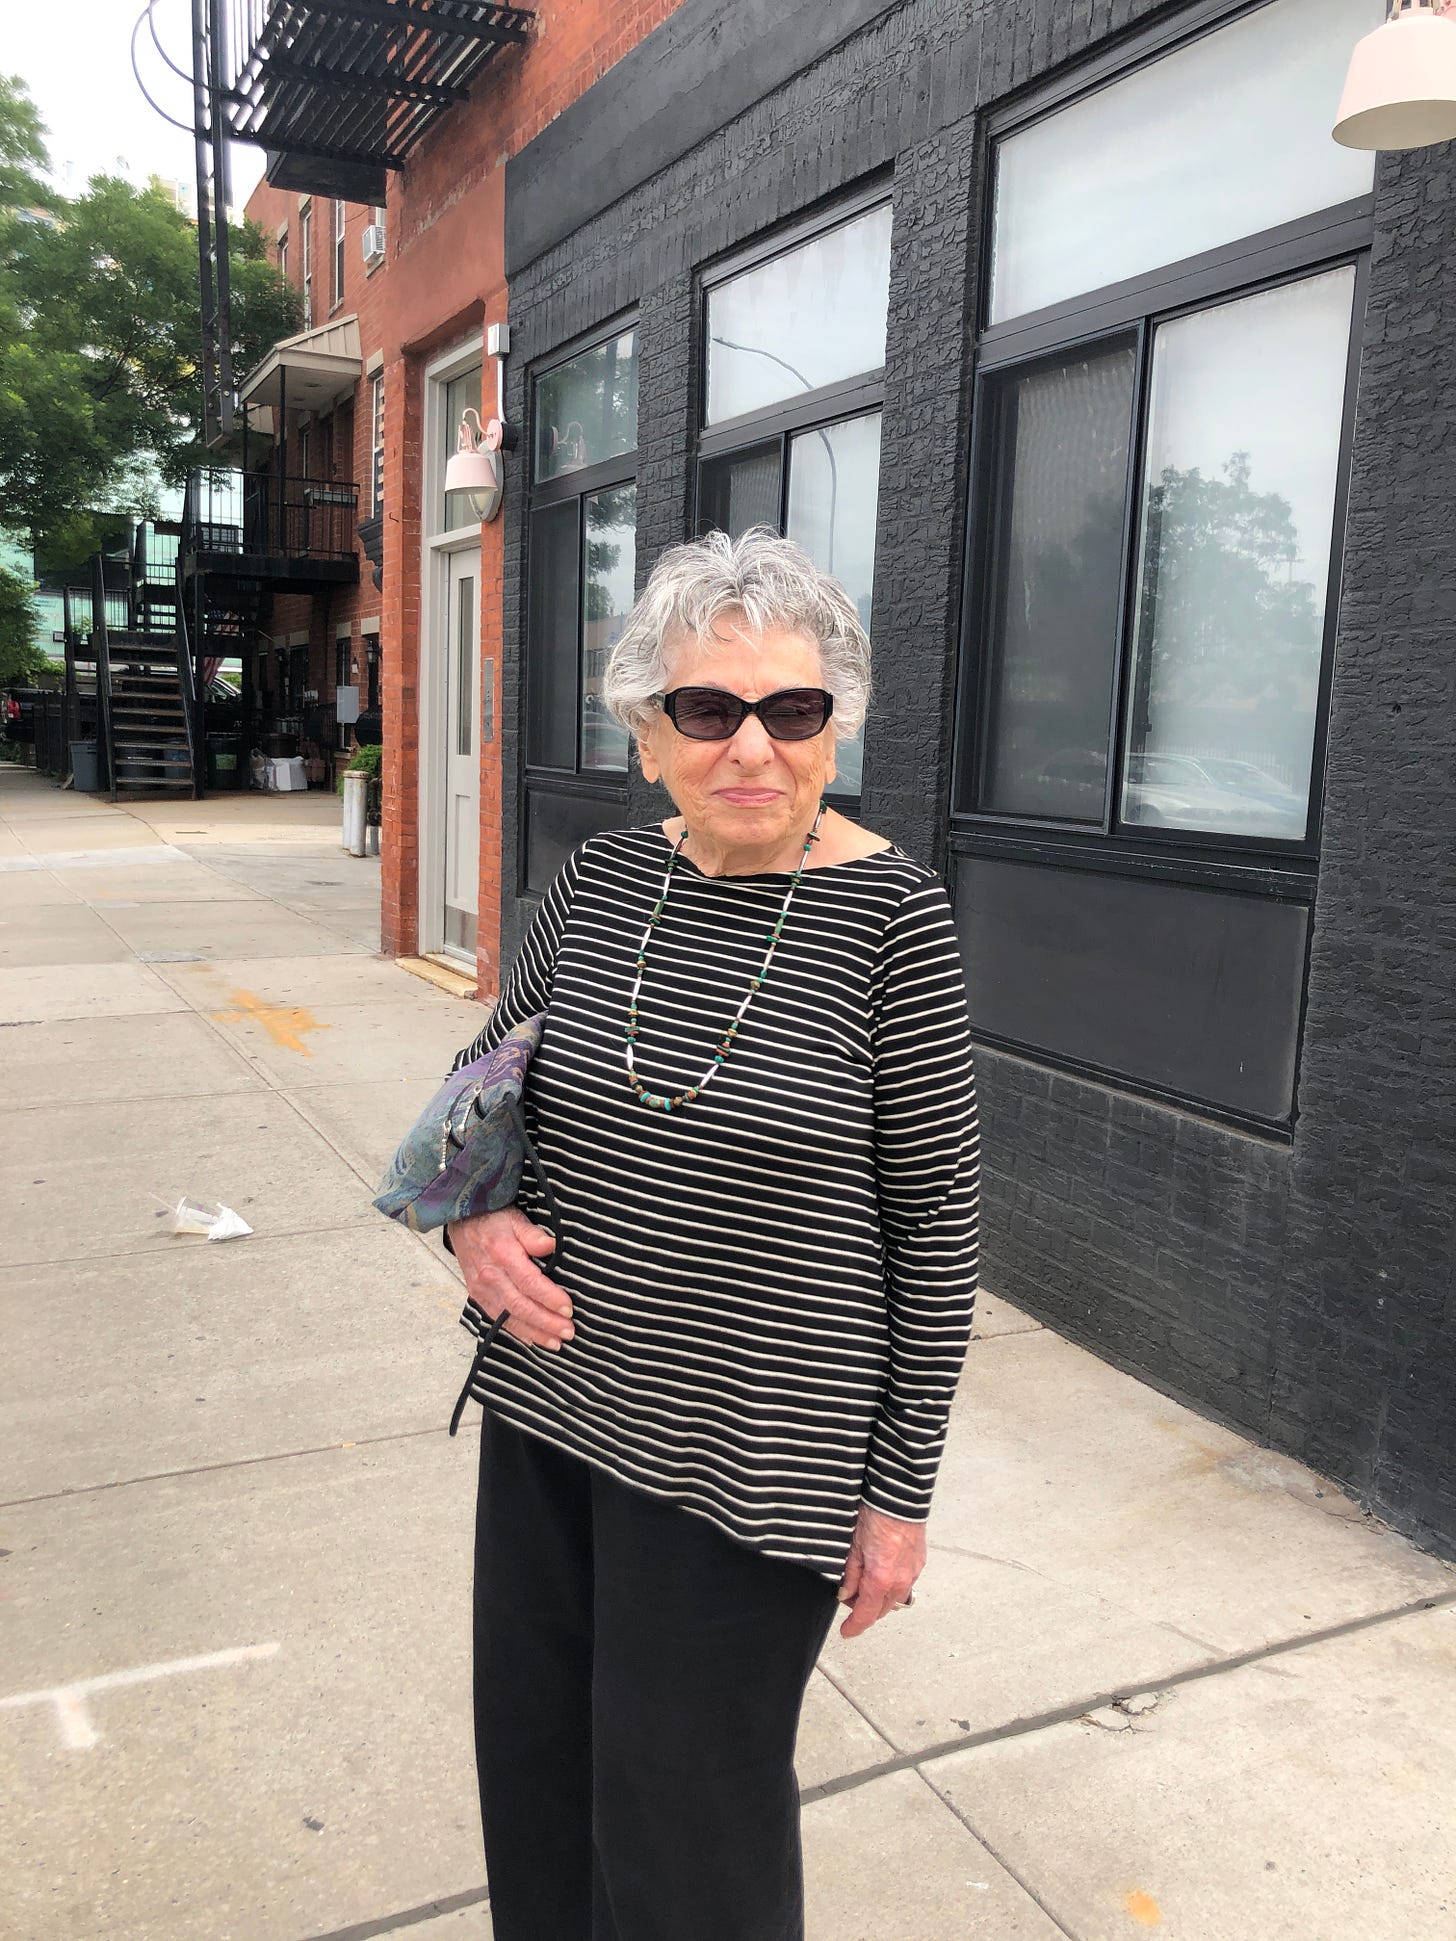 My grandma in sunglasses and a stripey shirt looking extremty cool on a street in Brooklyn.